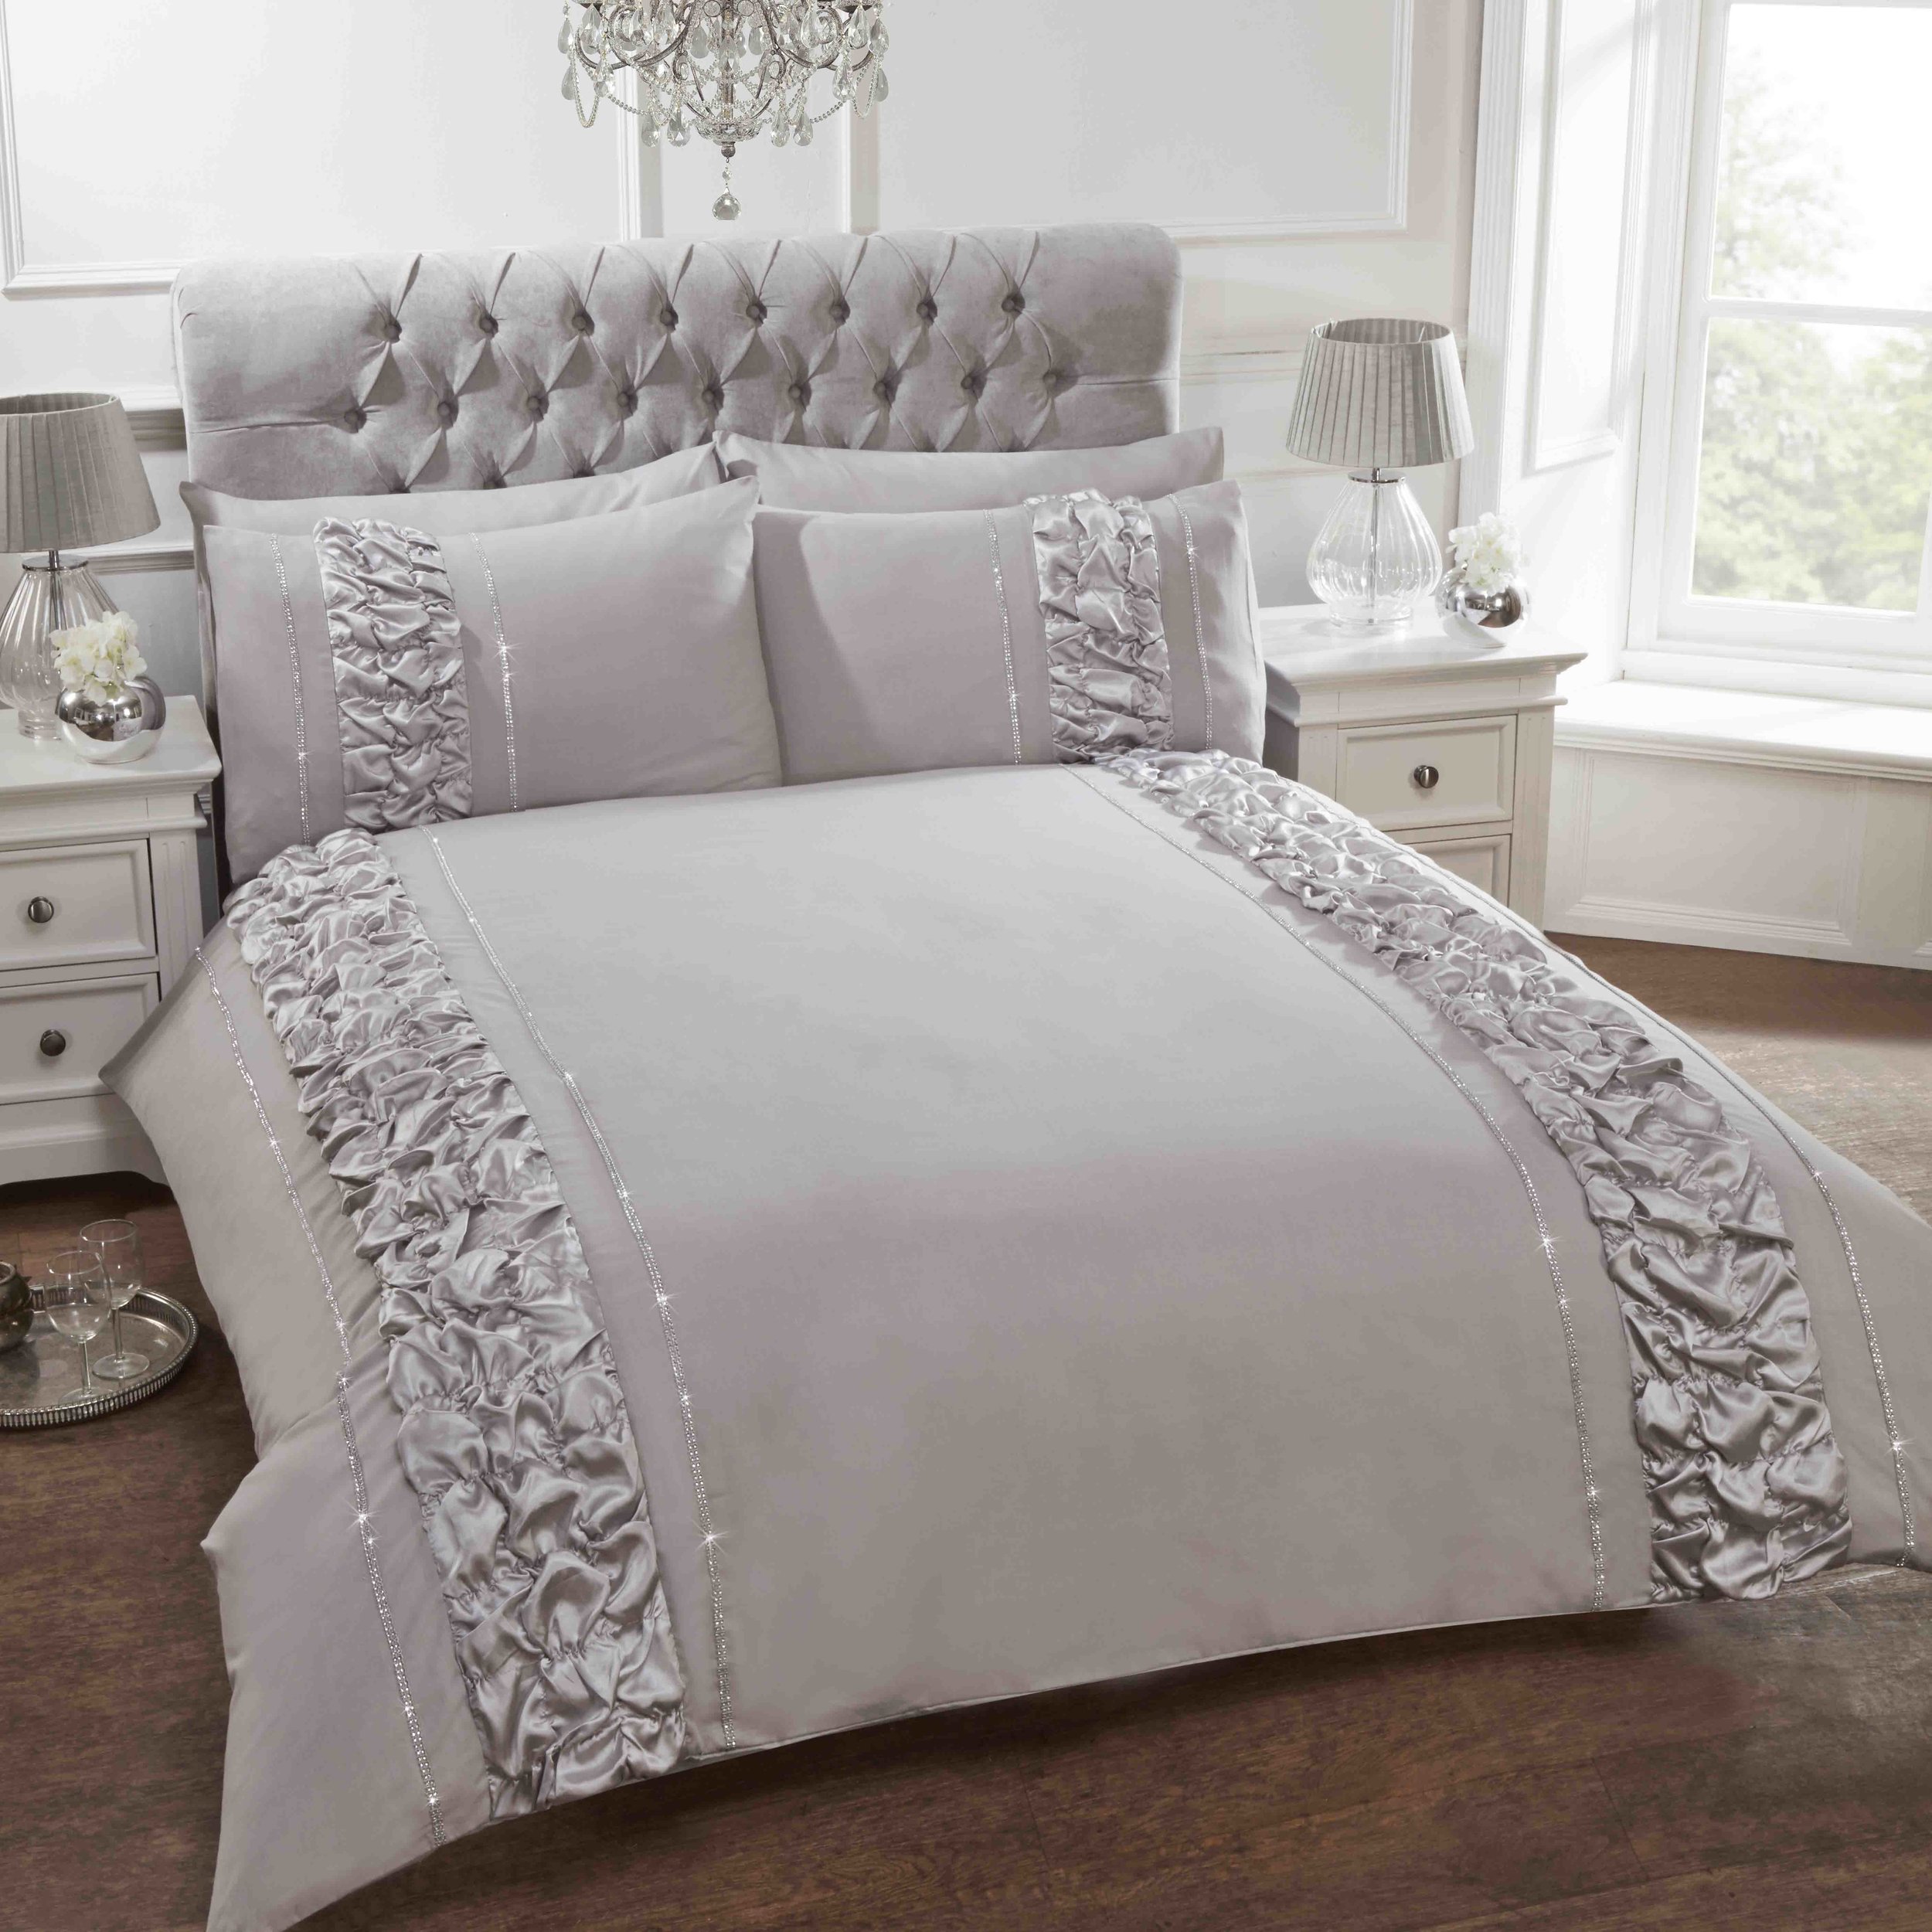 CARLY DIAMANTE GREY KING SIZE DUVET COVER SET ADULT BEDDING SET NEW